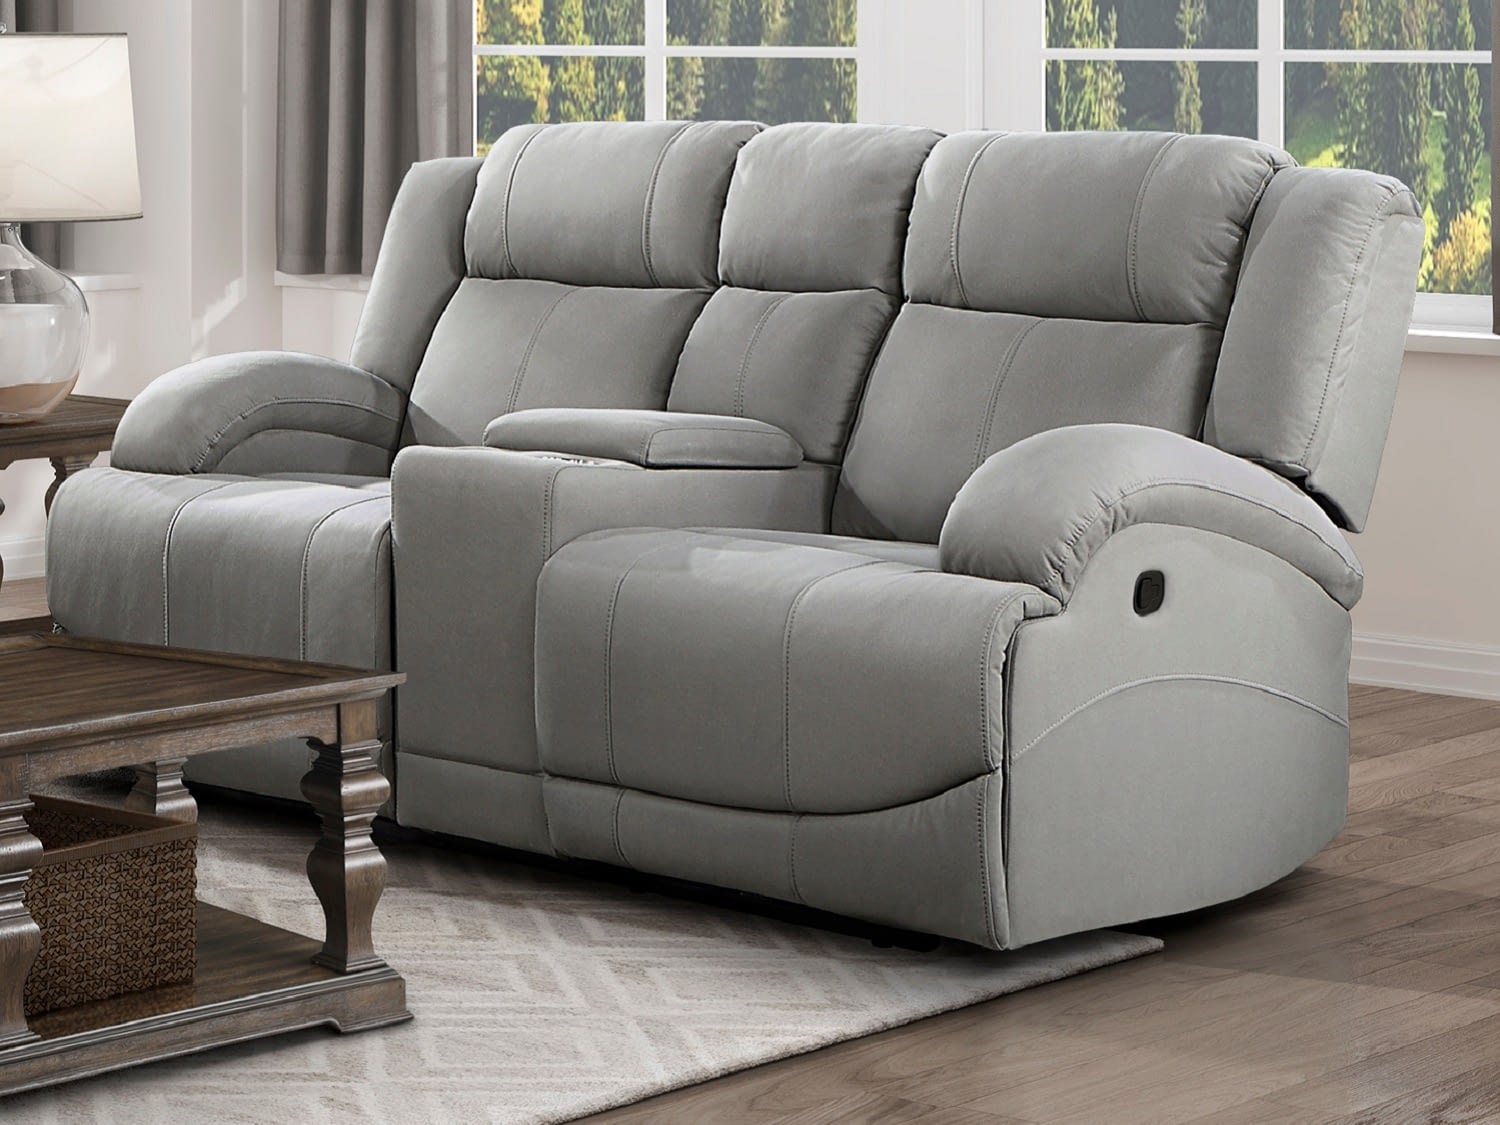 QUINCY Reclining Loveseat with Console